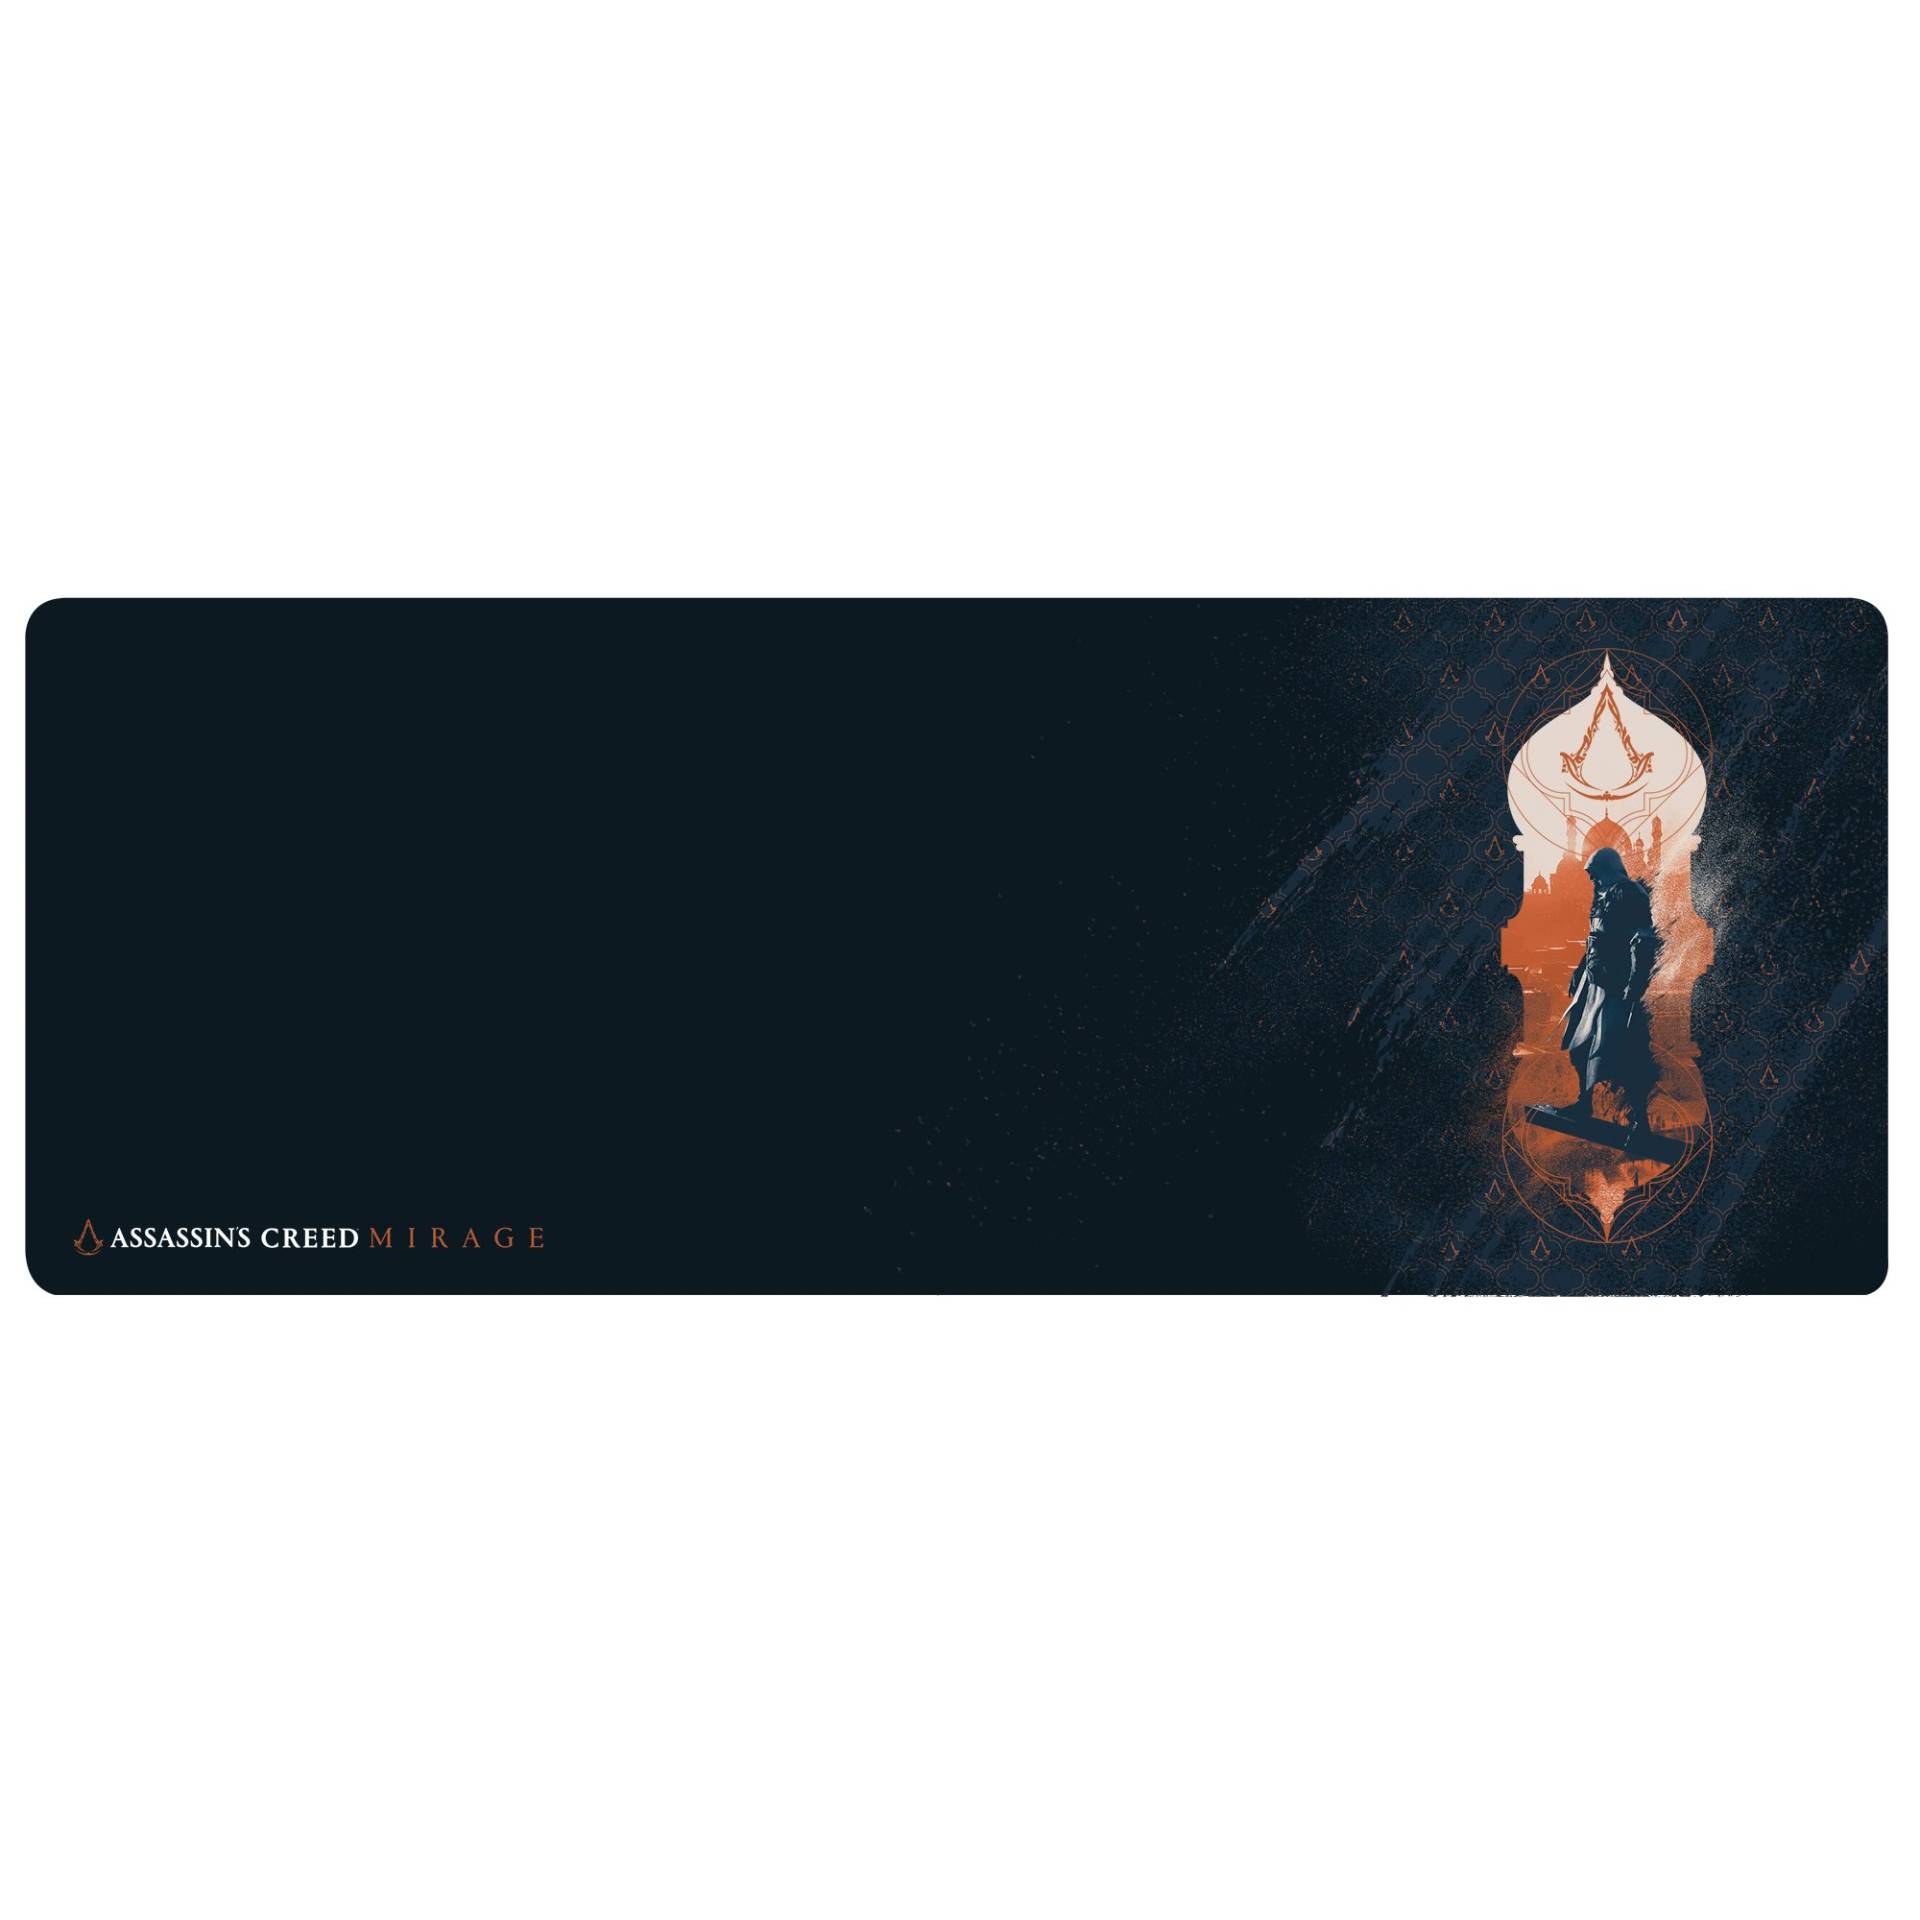 Assassin's Creed Mirage - XL Mouse Pad - Blue Silhouette Logo von Trade invaders